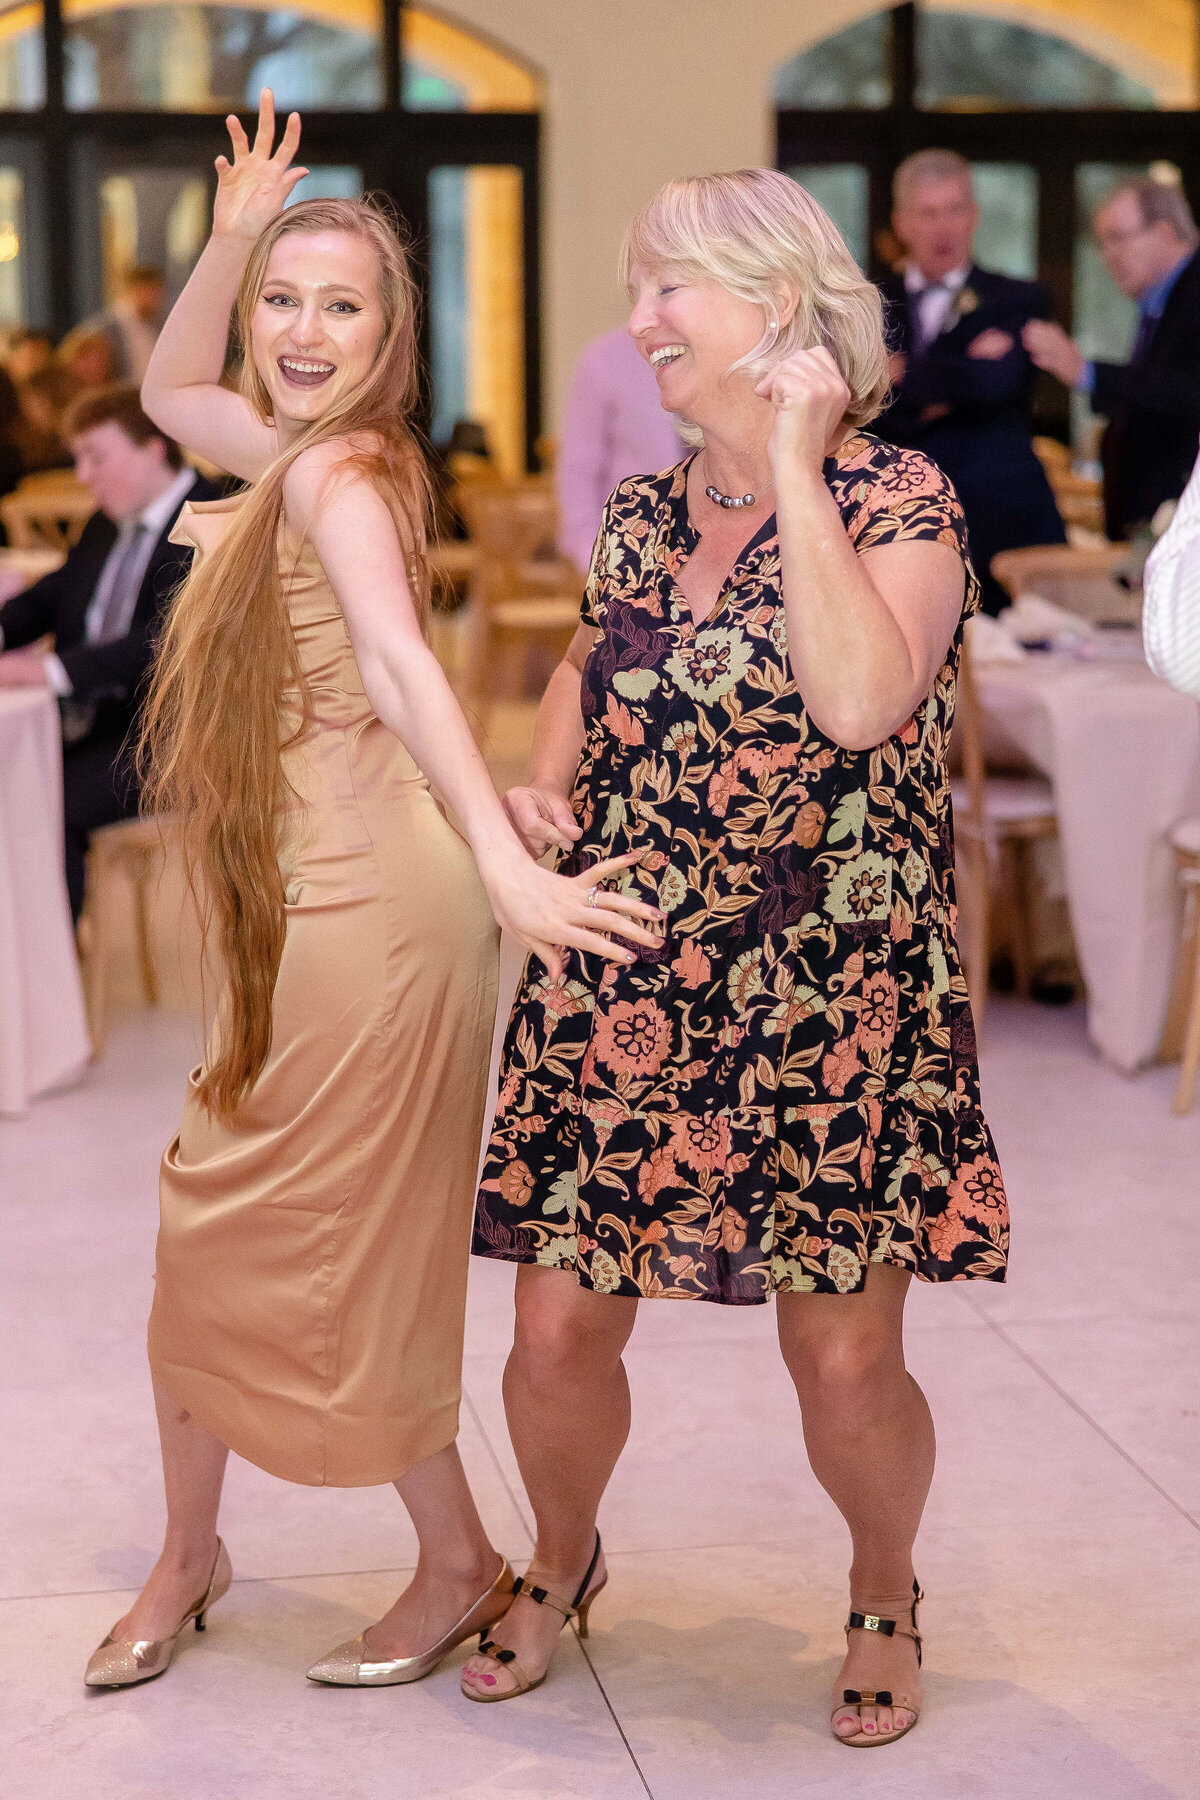 Fort Worth Wedding Photographer captures two women guests dancing and laughing at reception